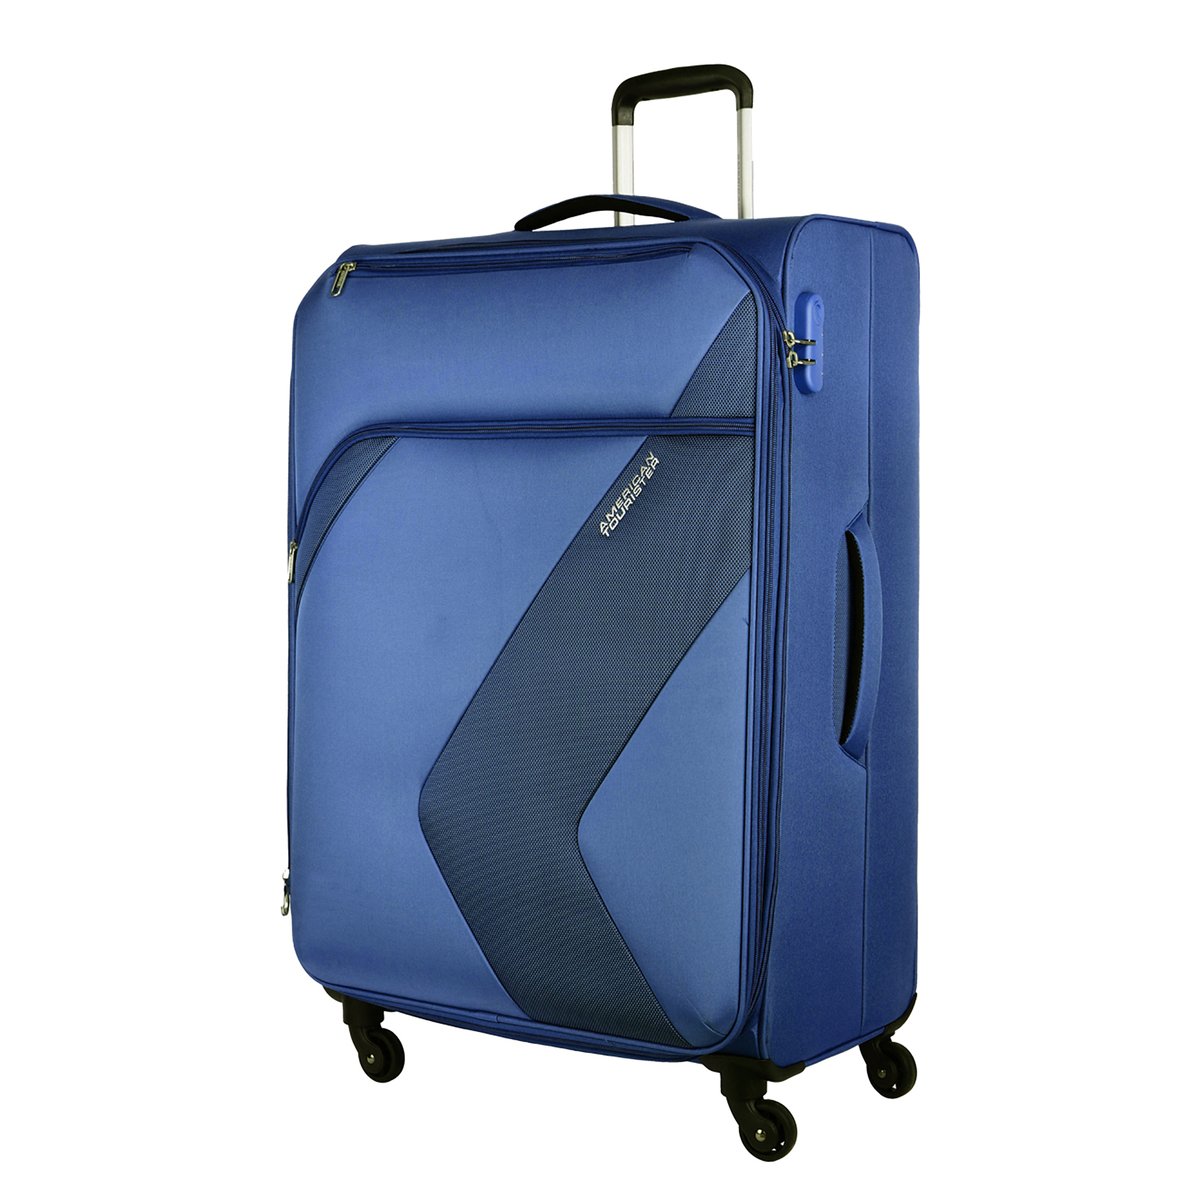 American Tourister Stanford 4 Wheel Soft Trolley, 67 cm, Navy